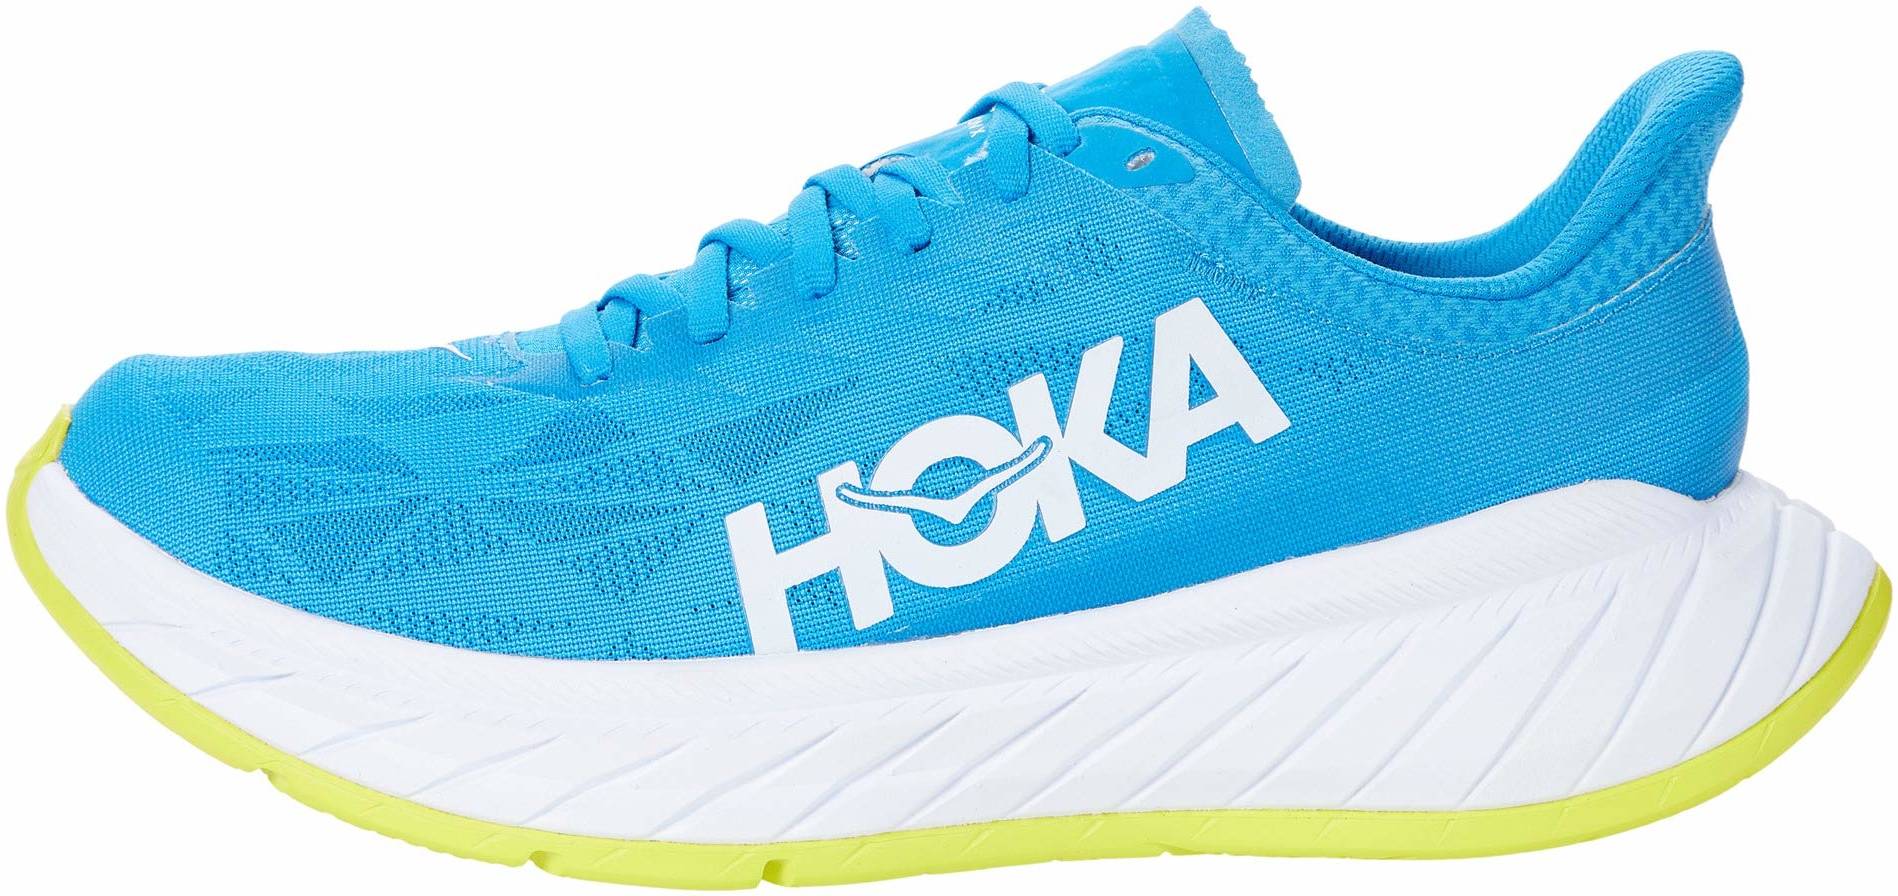 Hoka One One Carbon X 2 Review 2022, Facts, Deals ($130) | RunRepeat